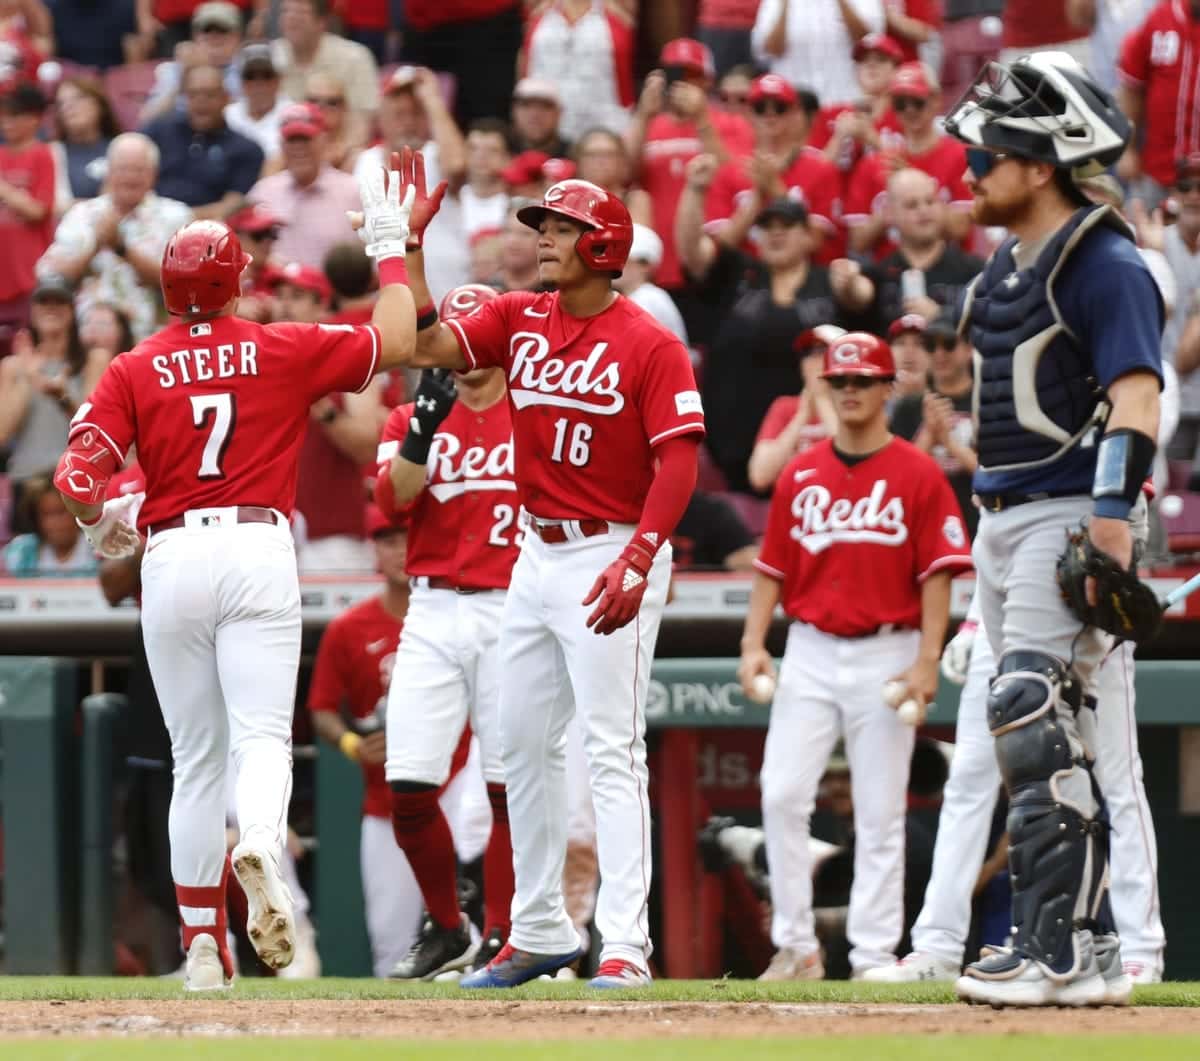 Seattle Mariners vs. St. Louis Cardinals live stream, TV channel